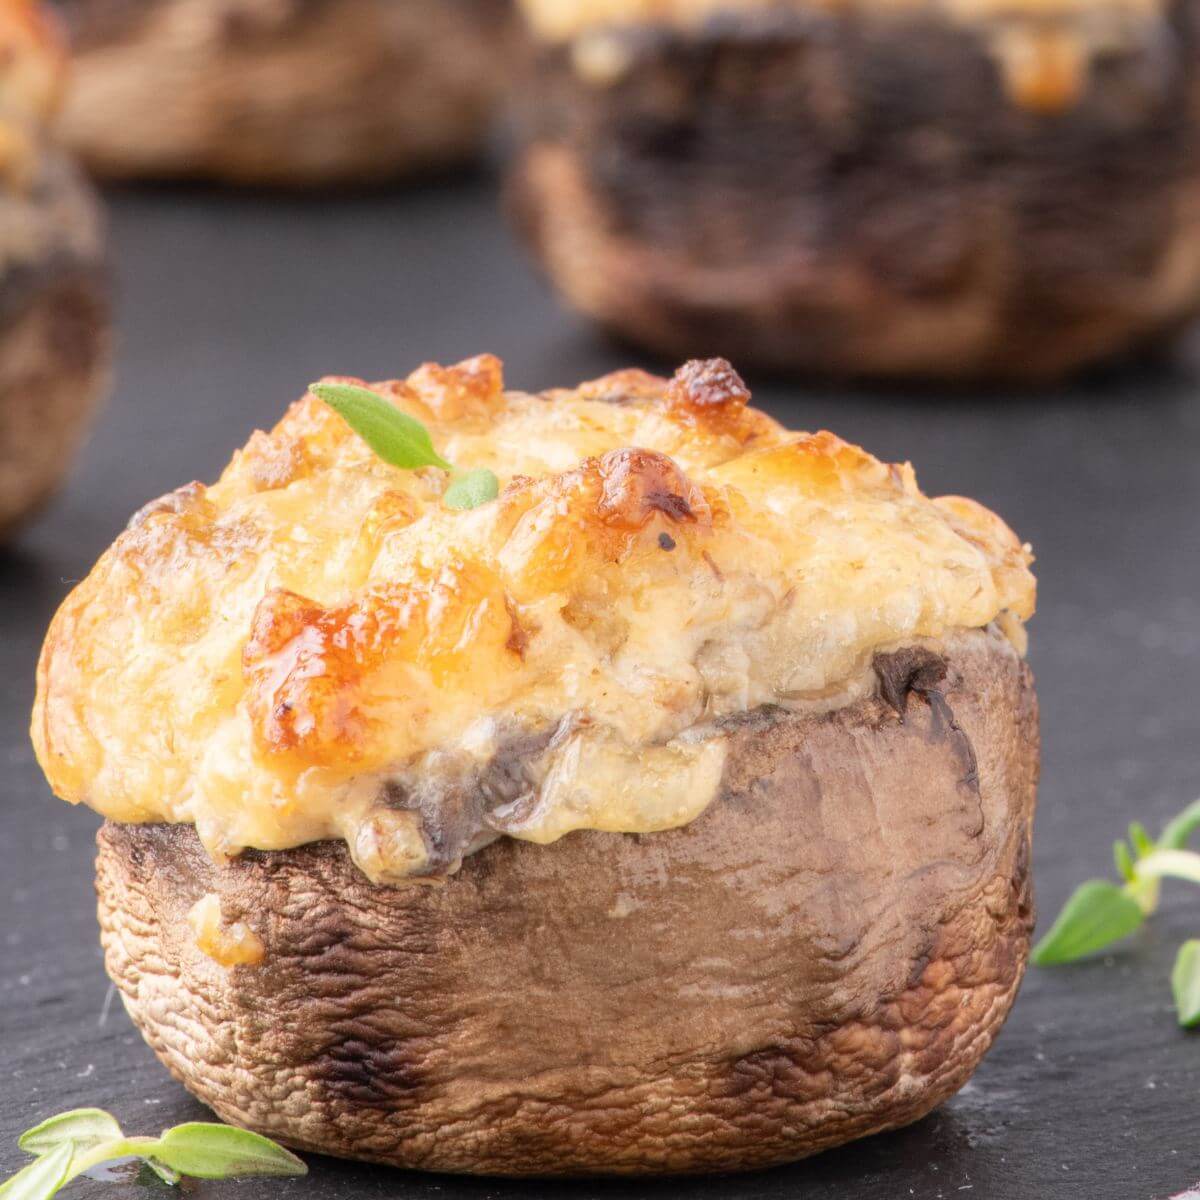 Fluffy, gooey cheese and sausage topping sits on a stuffed mushroom.